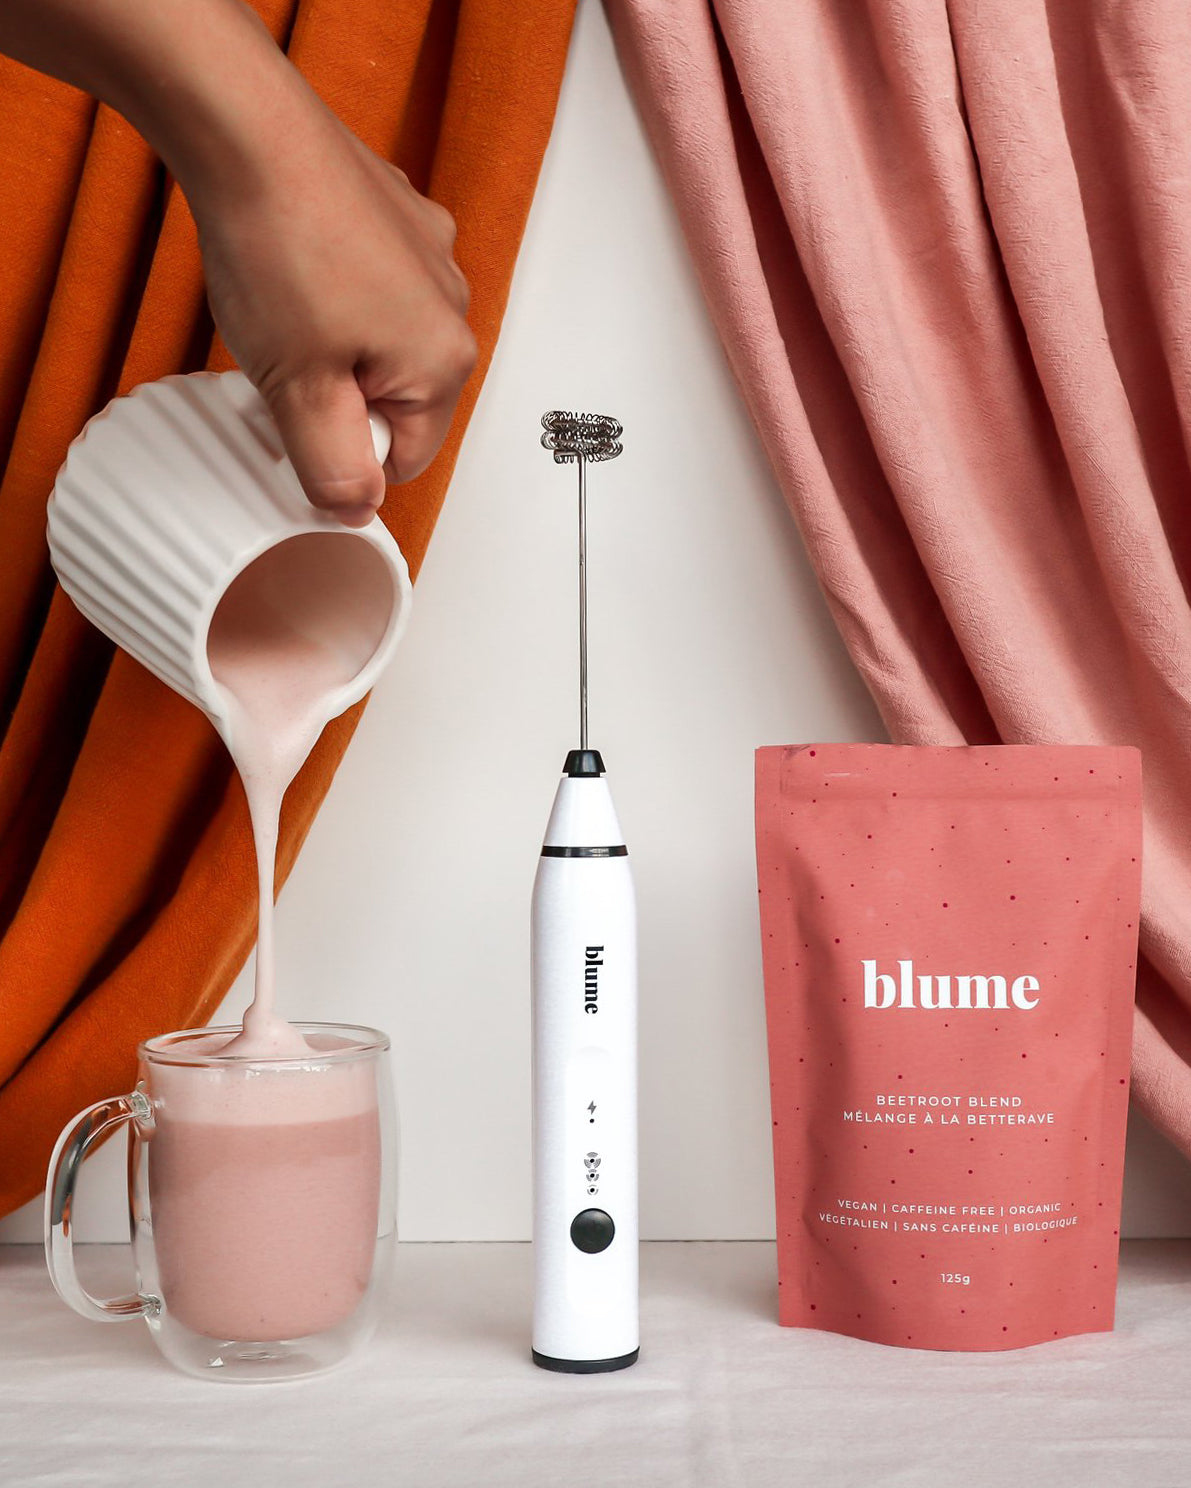 Blume Milk Frother - The Breakfast Pantry